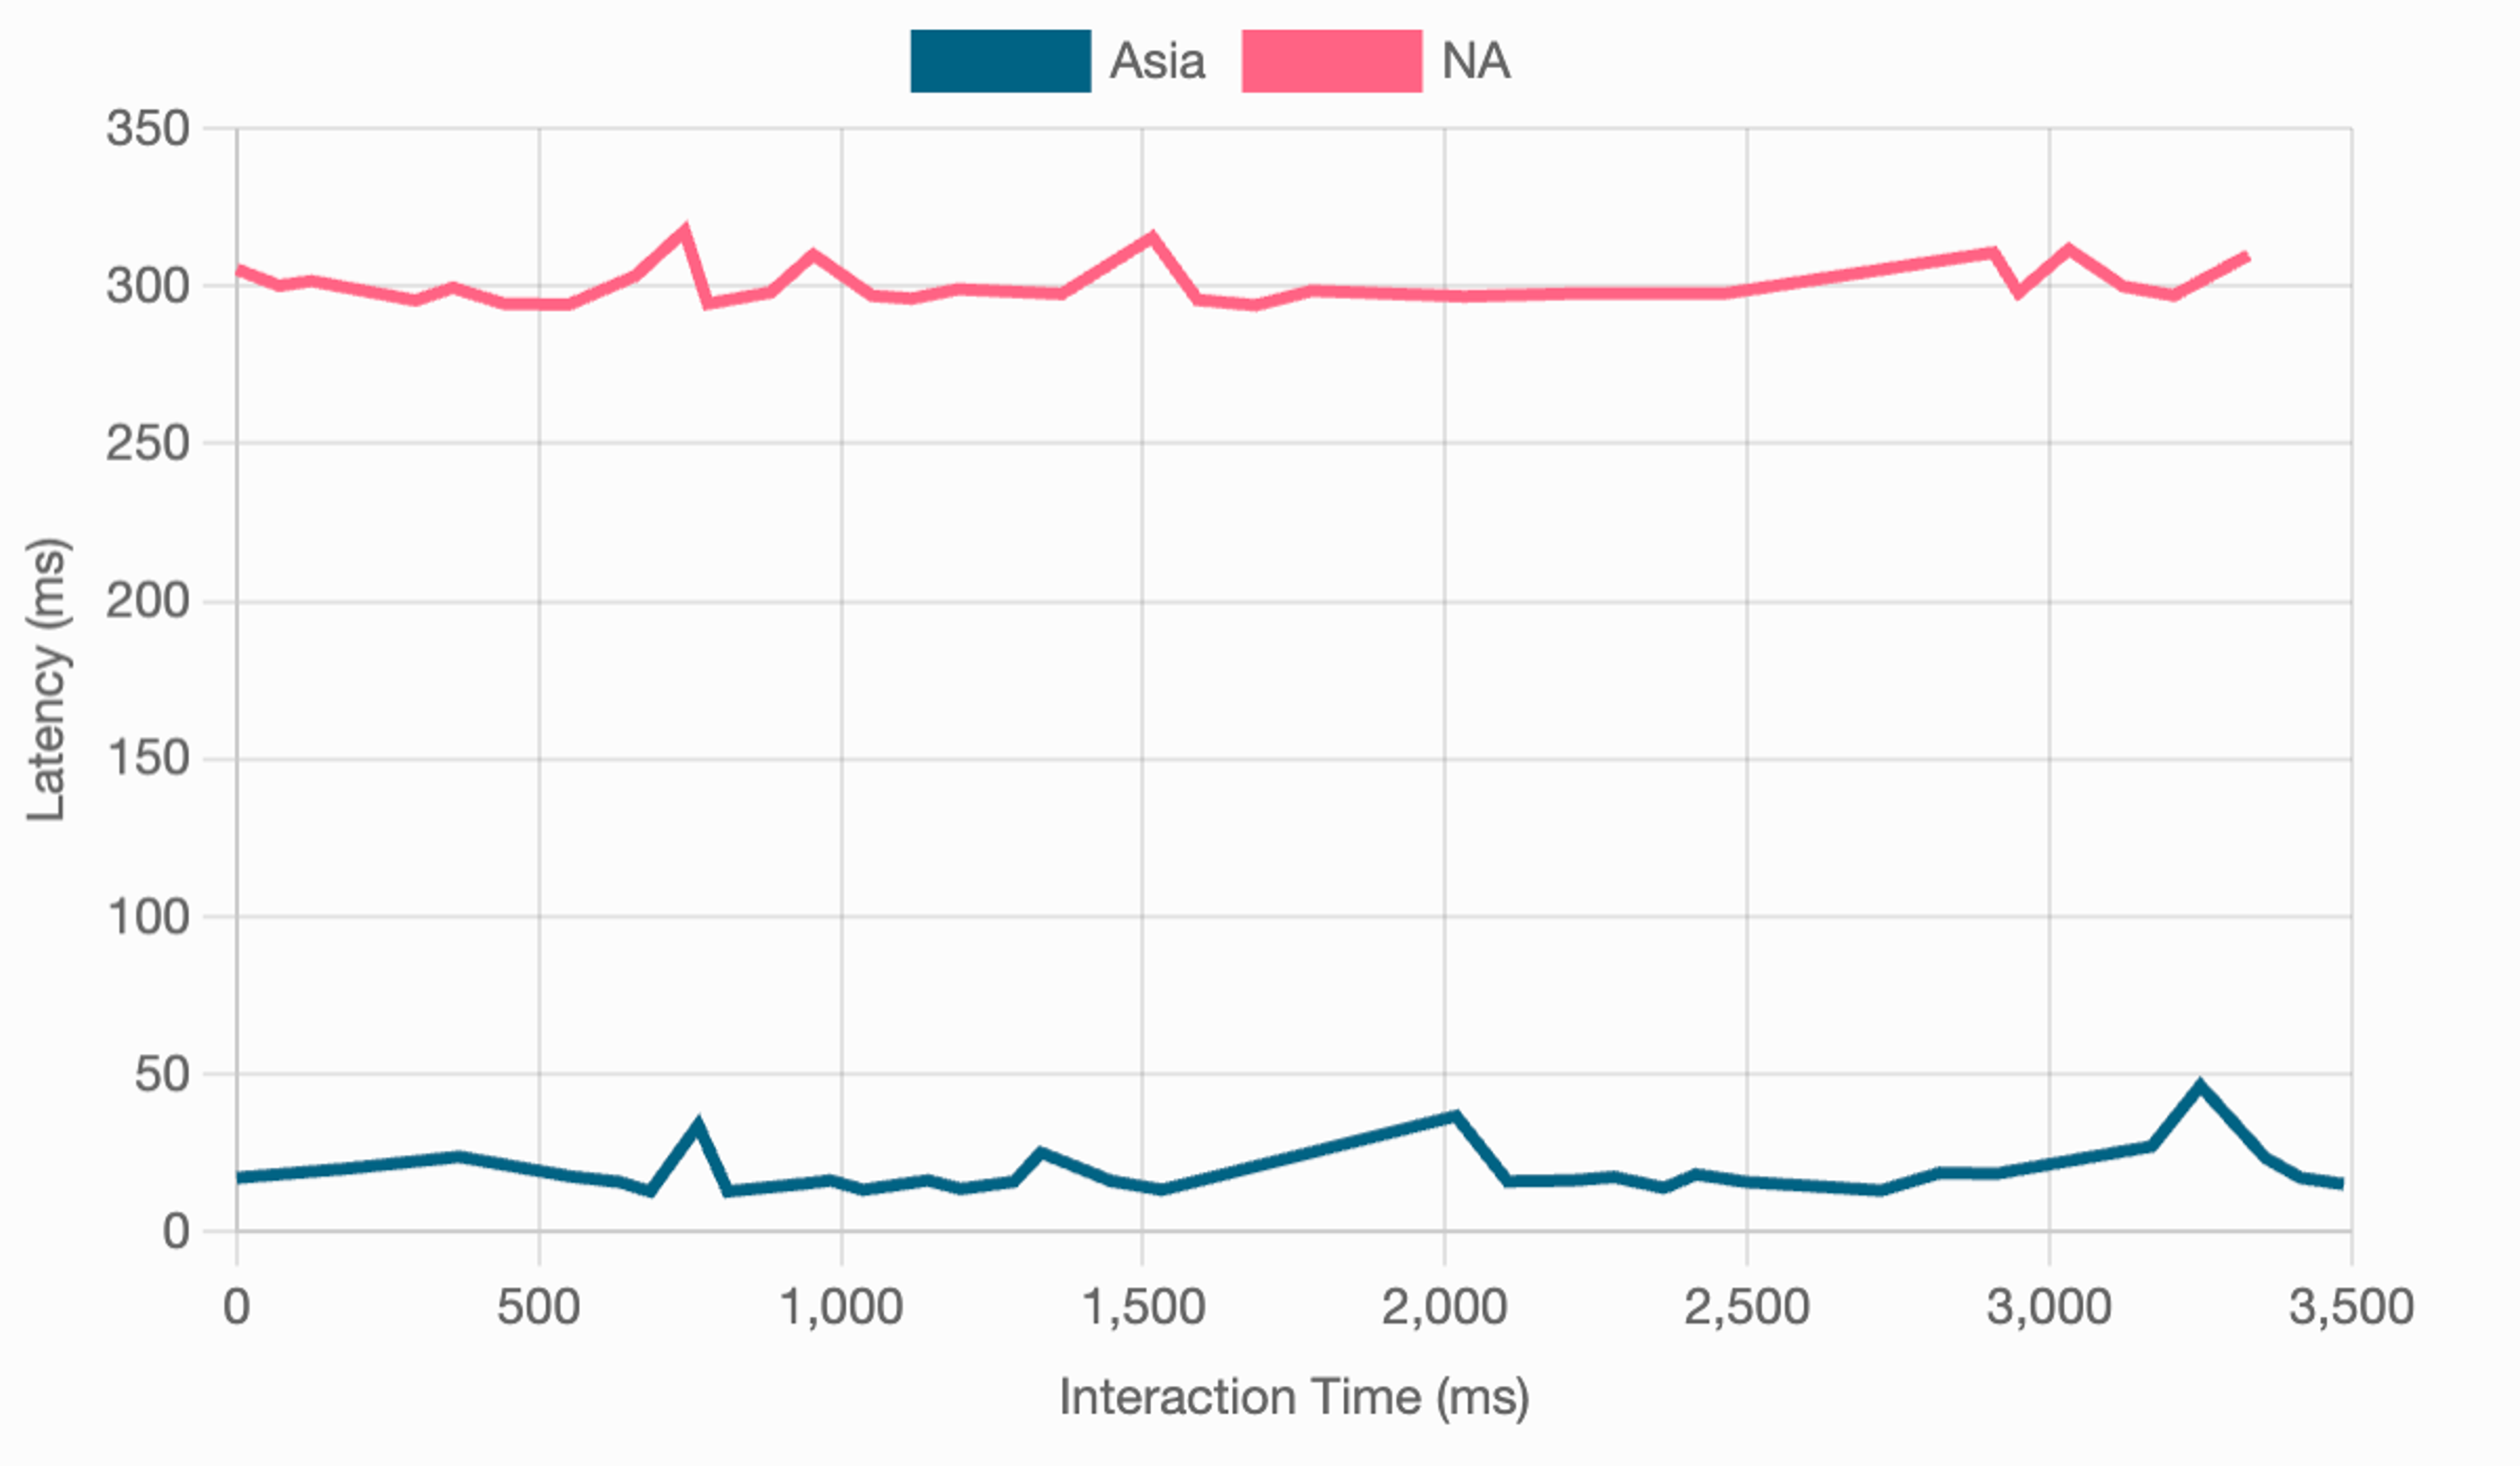 Interaction latency as perceived by user